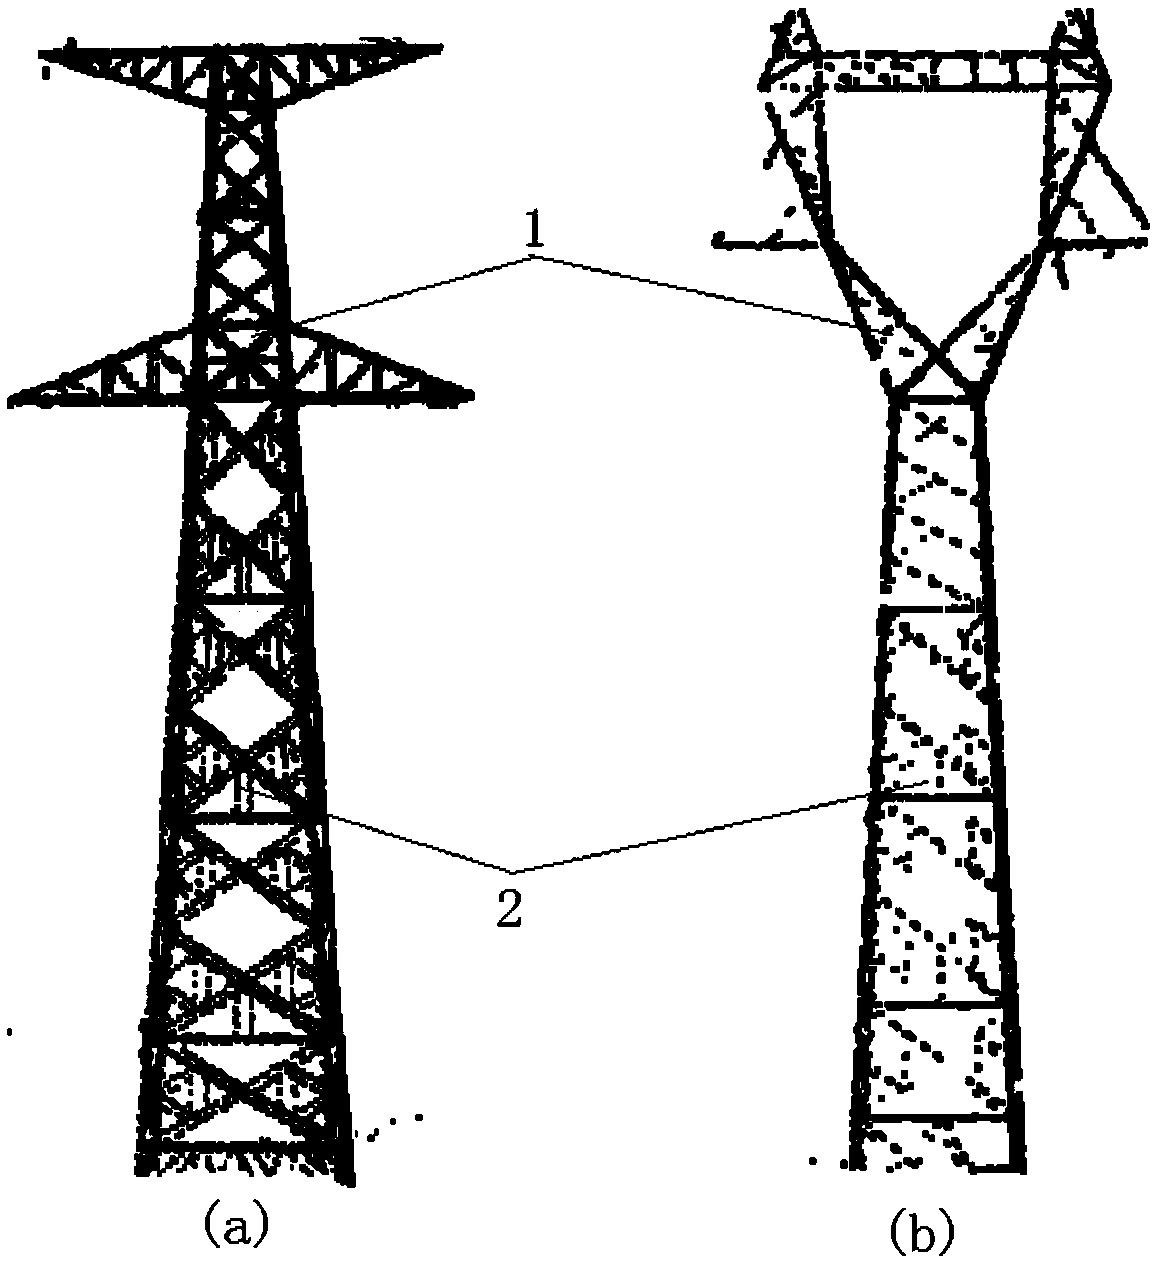 Three-dimensional reconstruction method for electric tower on the basis of LiDAR point cloud